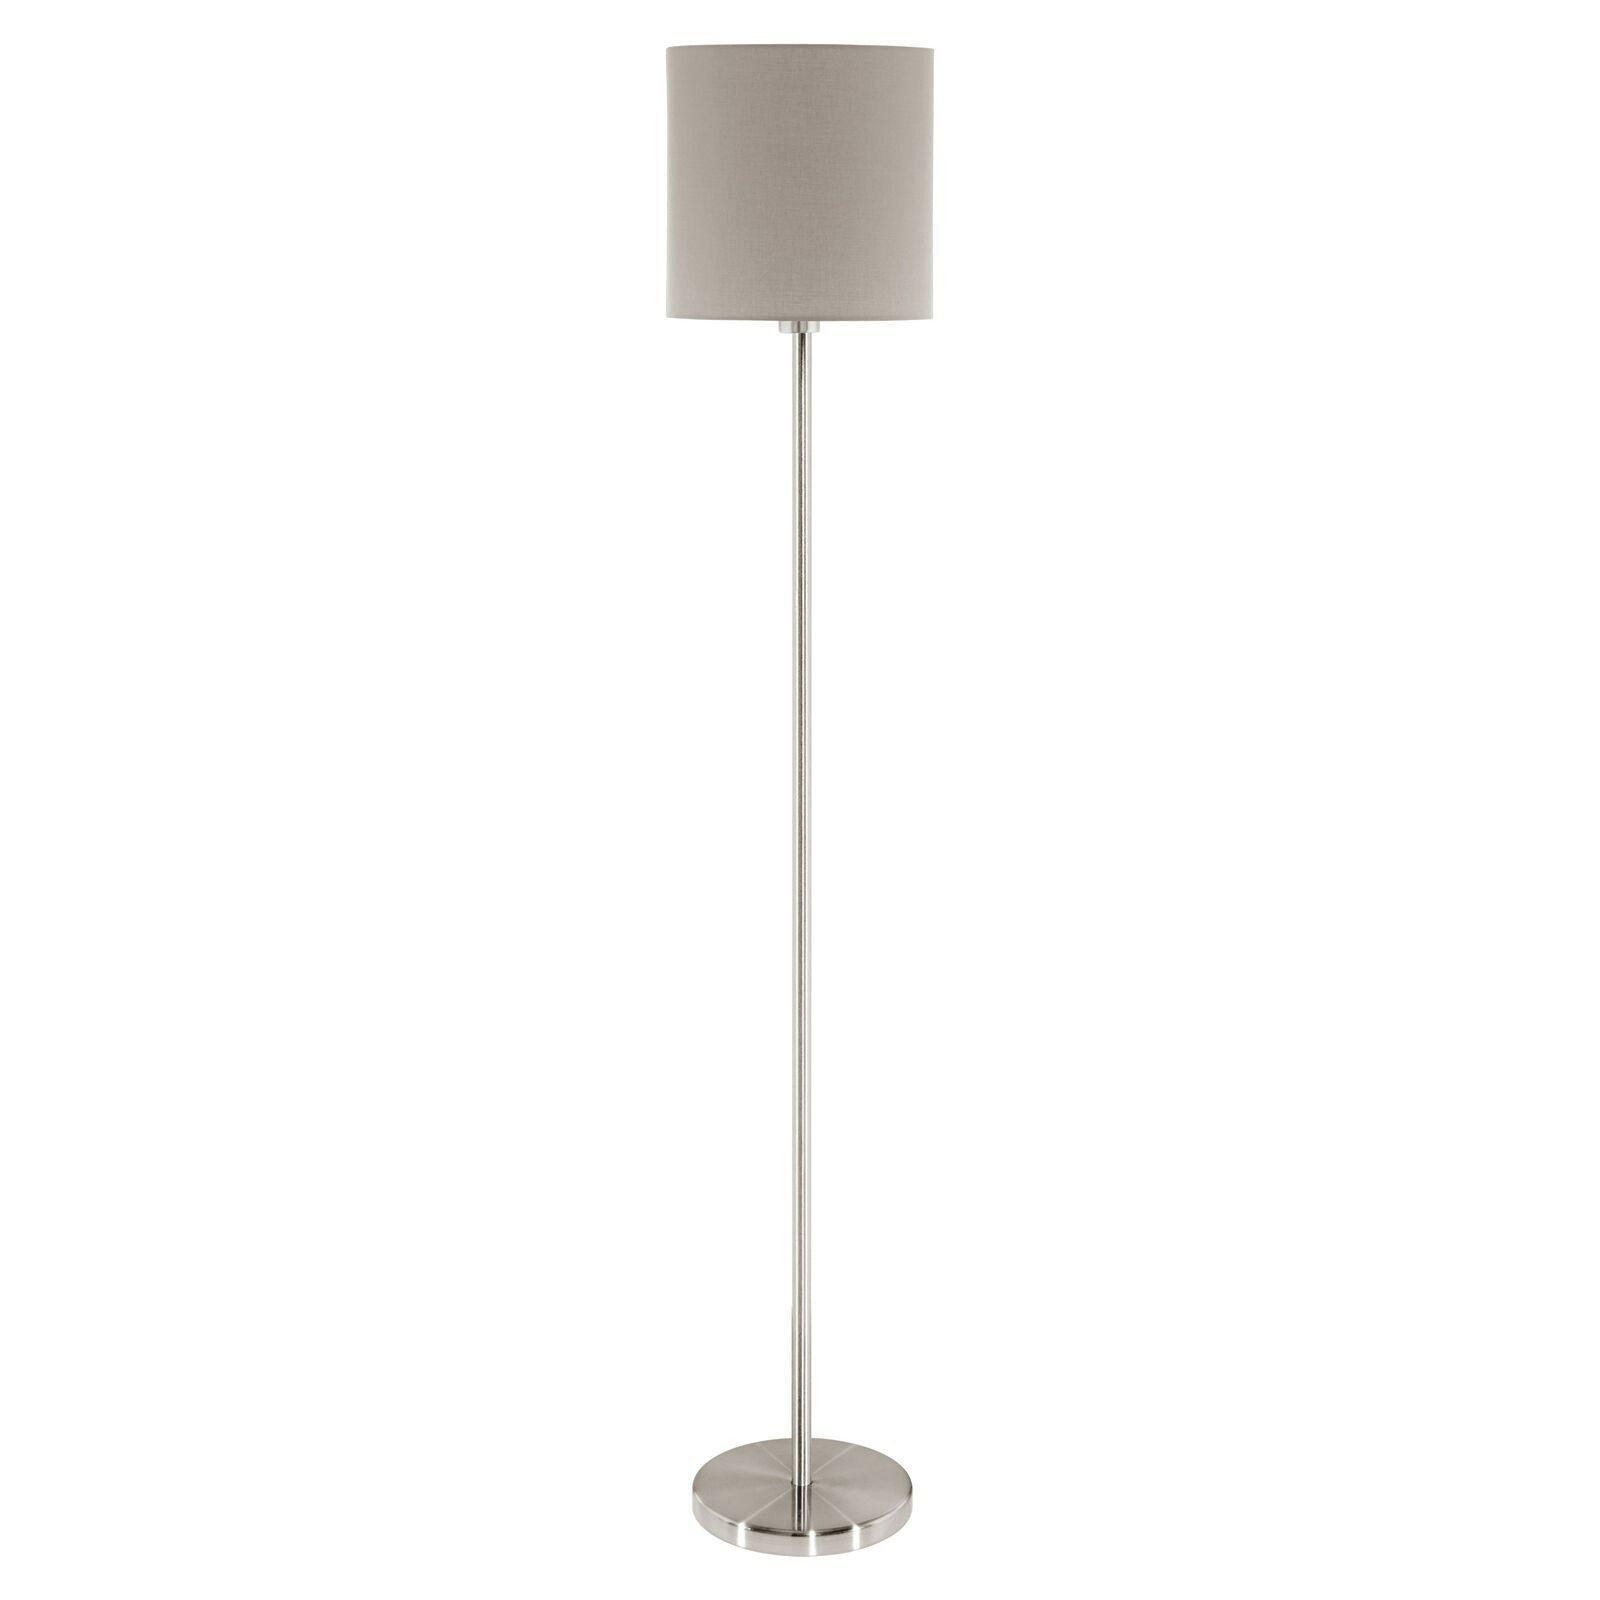 Floor Lamp Light Satin Nickel Shade Taupe Fabric Pedal Switch Bulb E27 1x60W - image 1